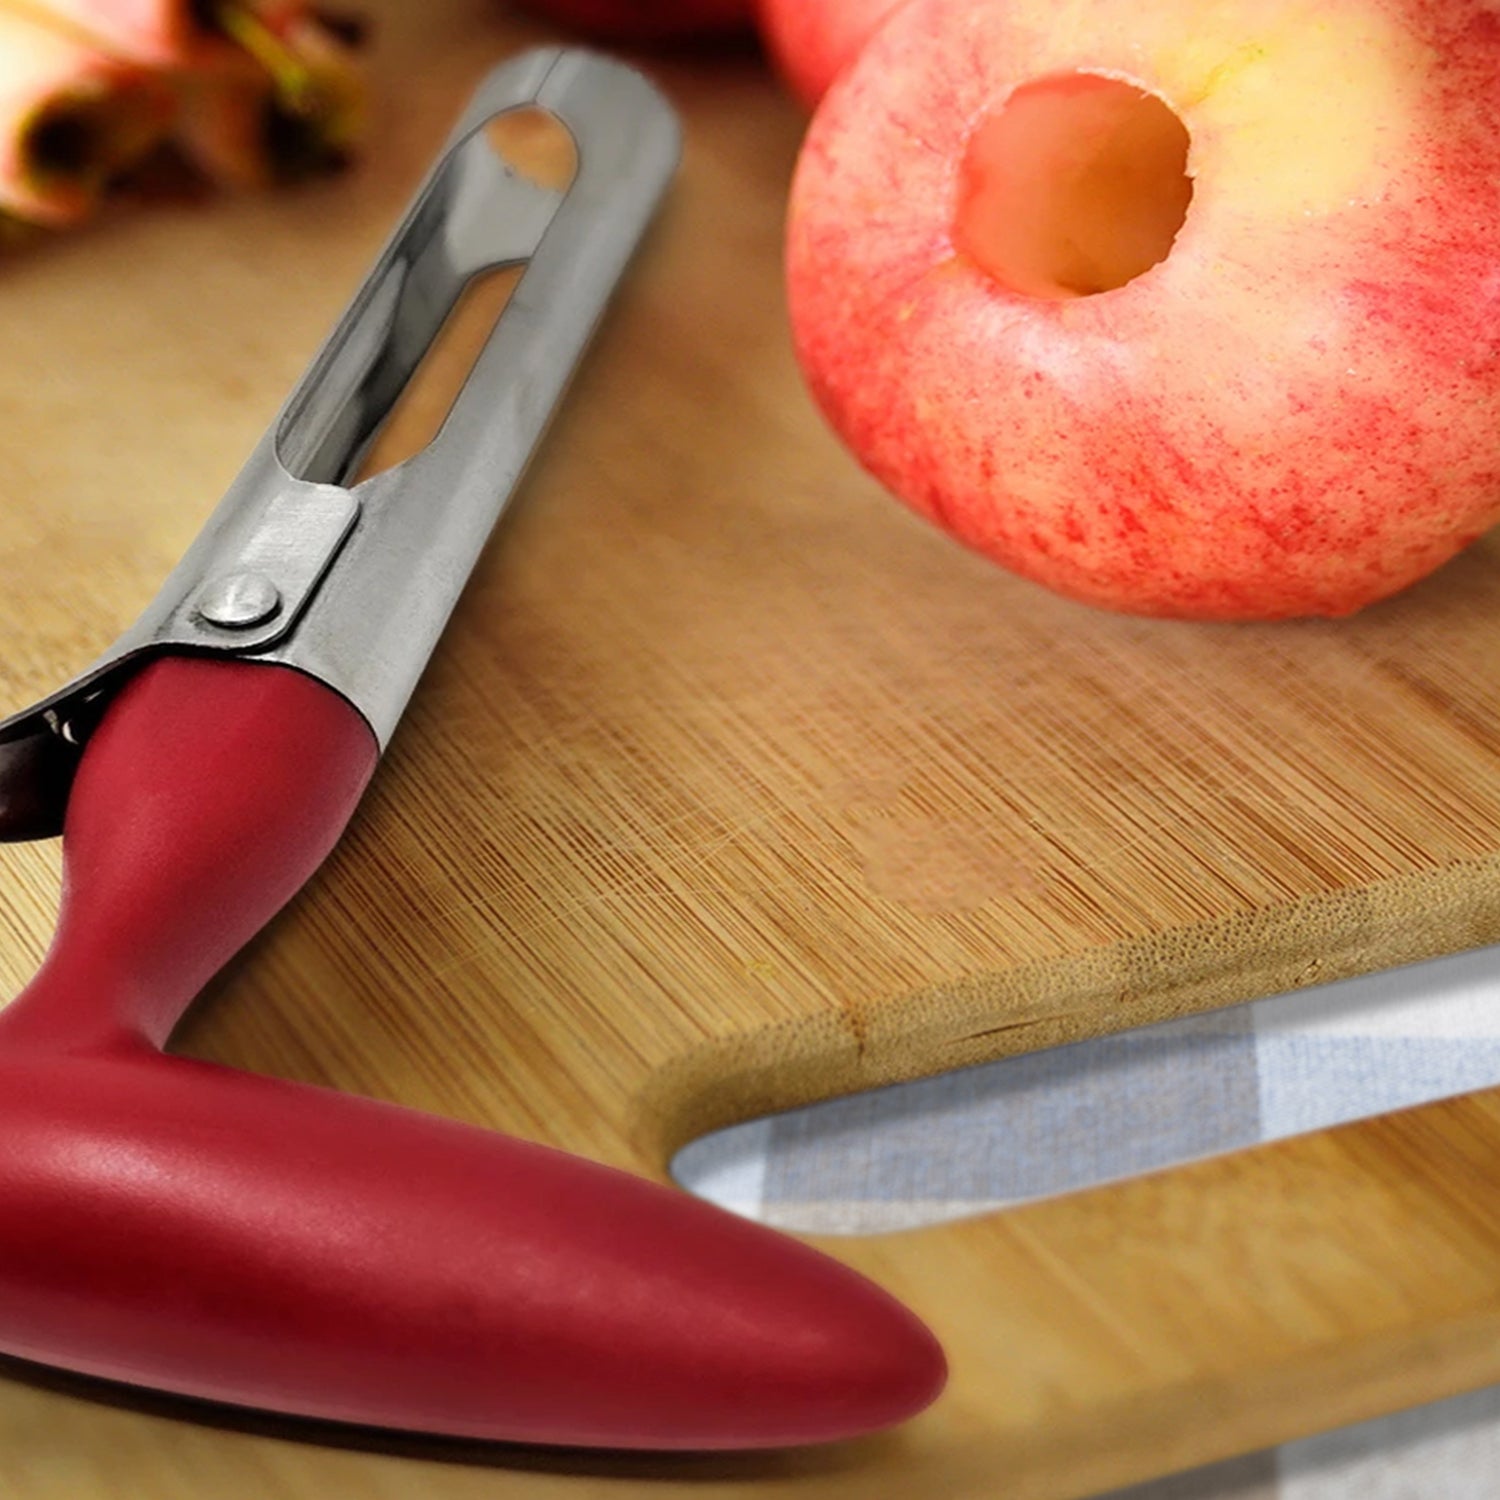 Stainless Steel Premium Apple And Fruit Corer Remover - image 5 of 6